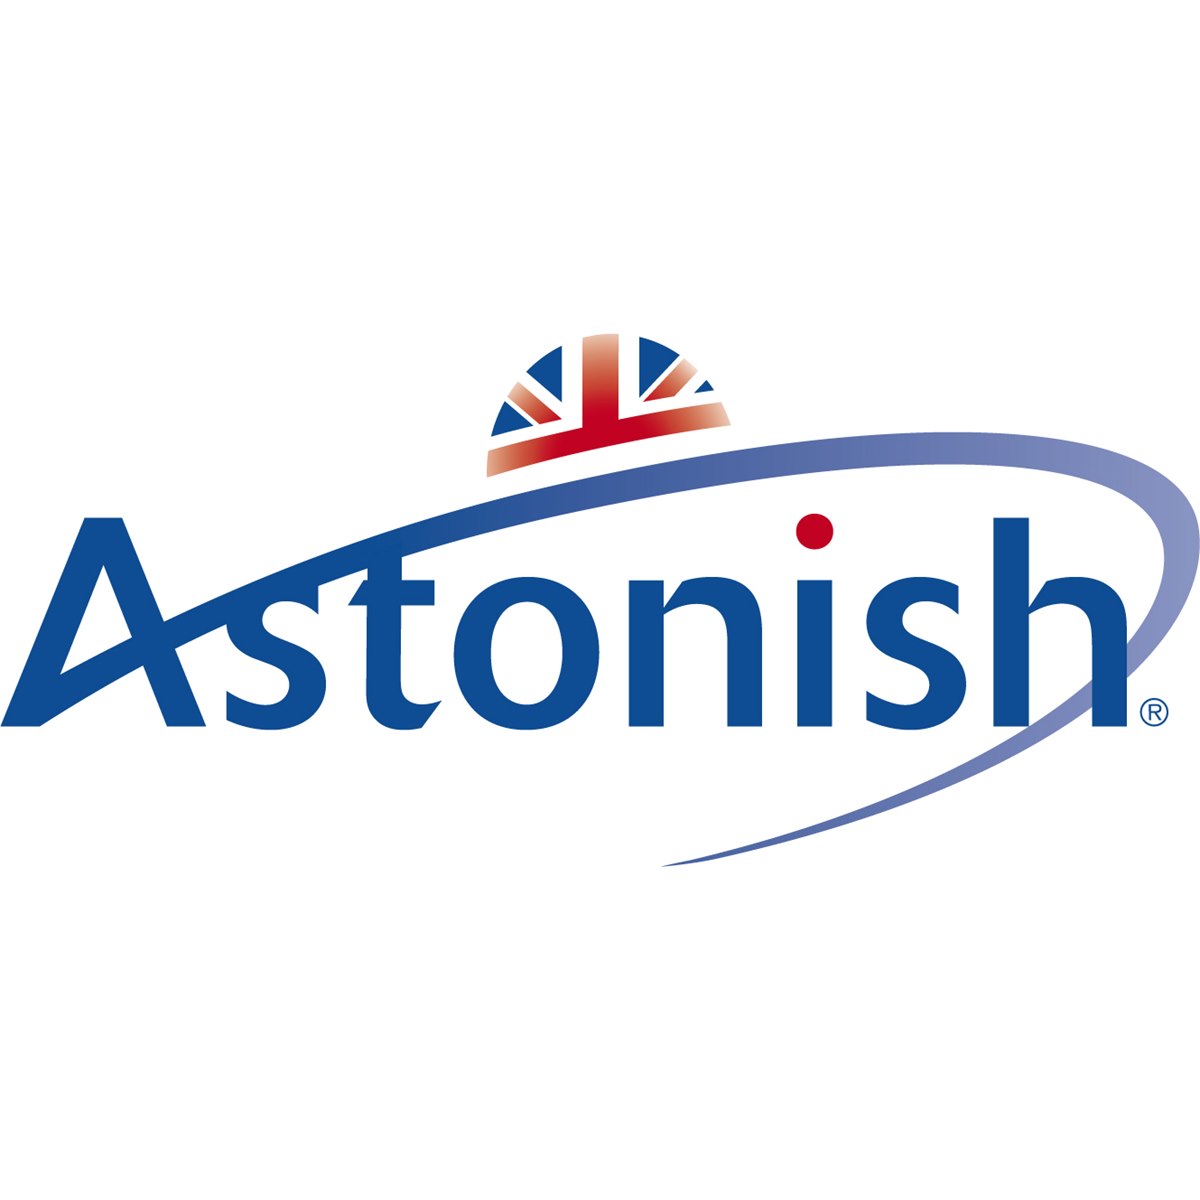 Where to Buy Astonish Products